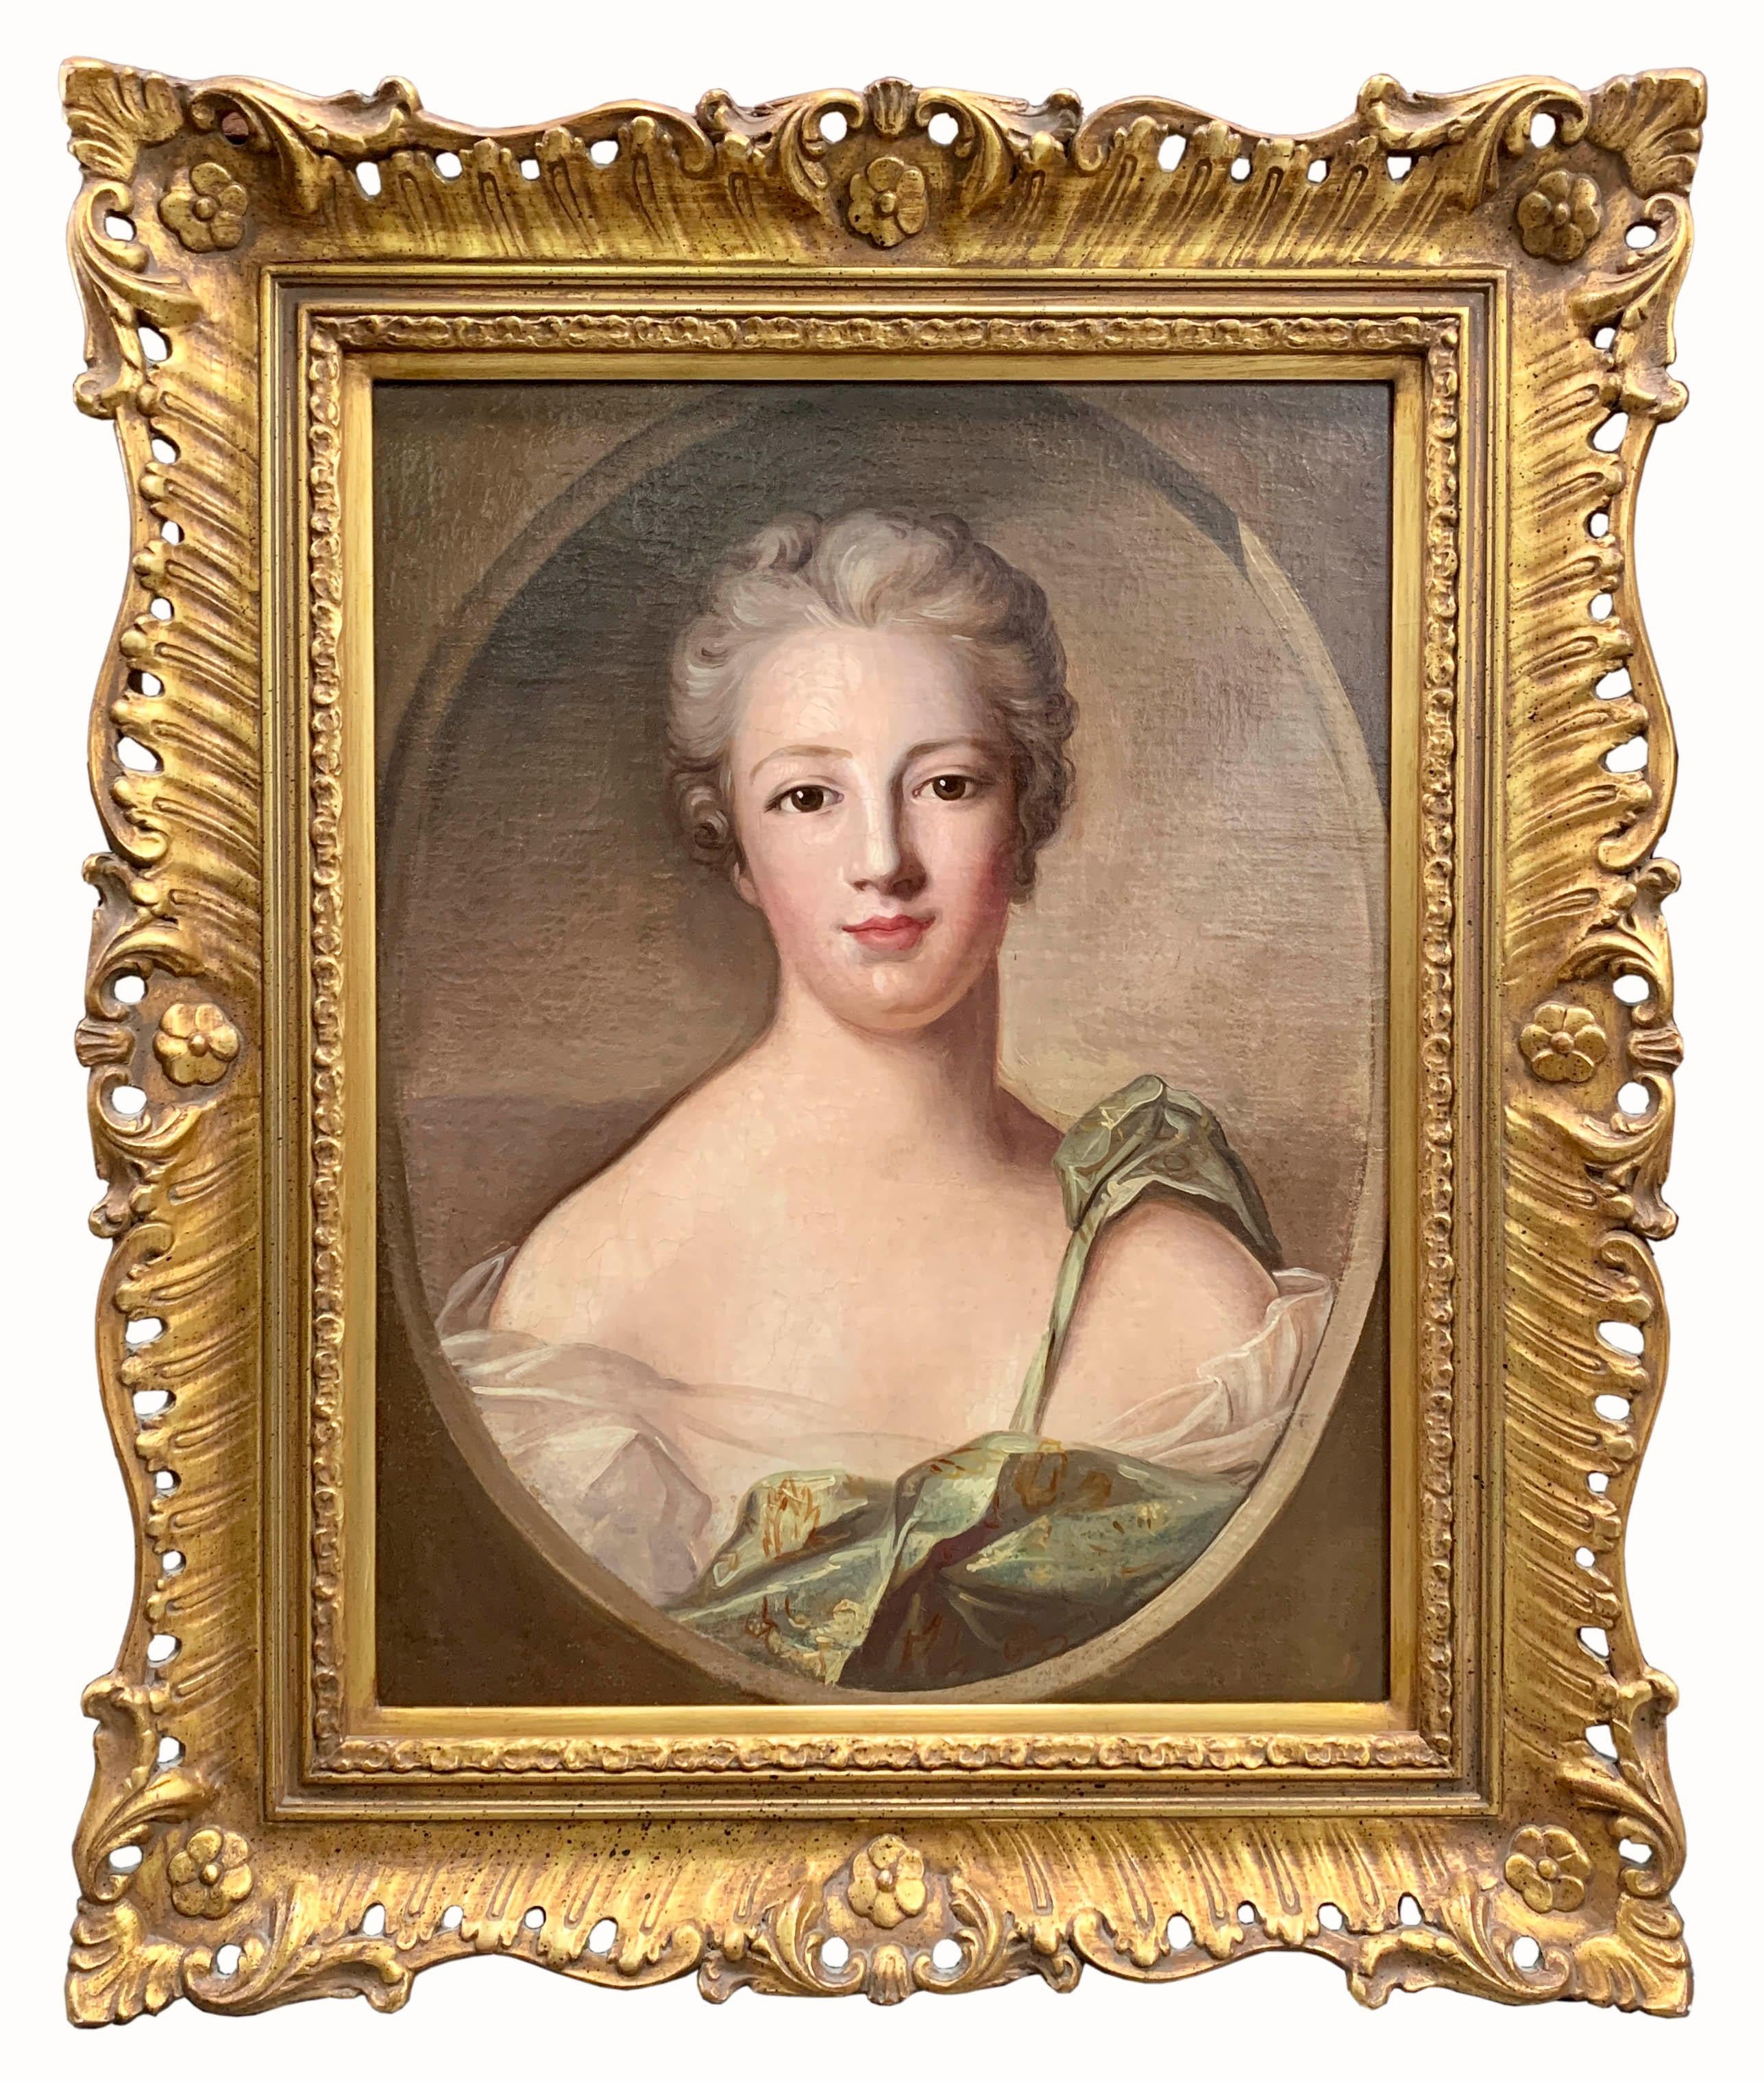 A charming pair of late 18th English century oil paintings on canvas. Each painting portrays a portrait of a young lady in oval within carved giltwood frame. 

Circa 1790

Dimensions:
Frame: 27.5